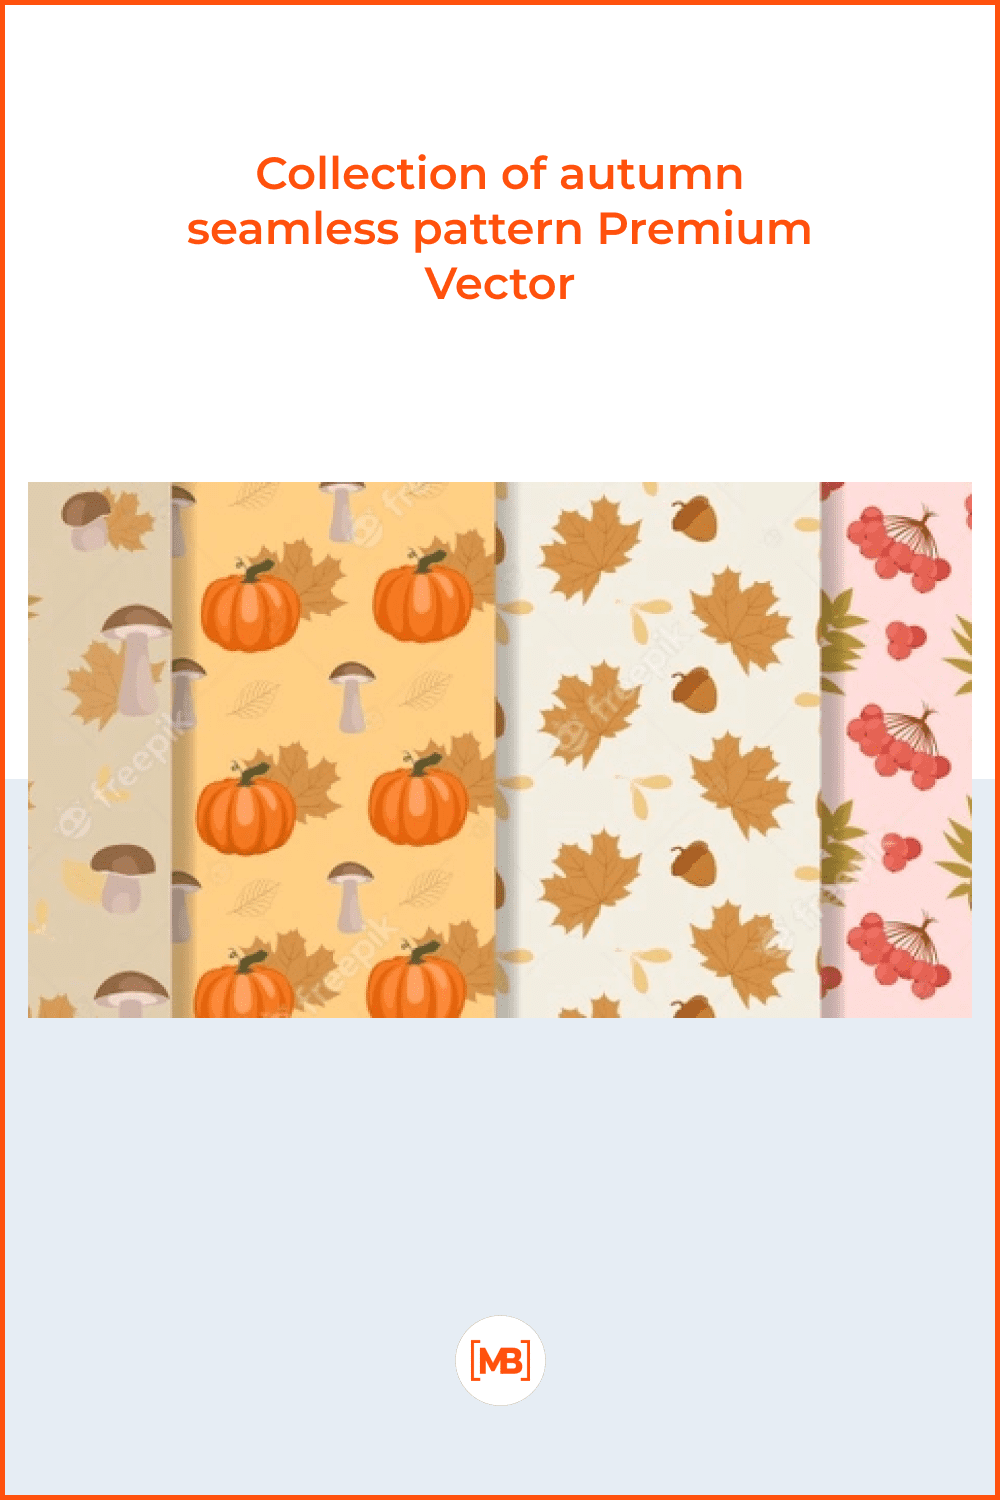 Collection of autumn seamless pattern Premium Vector.